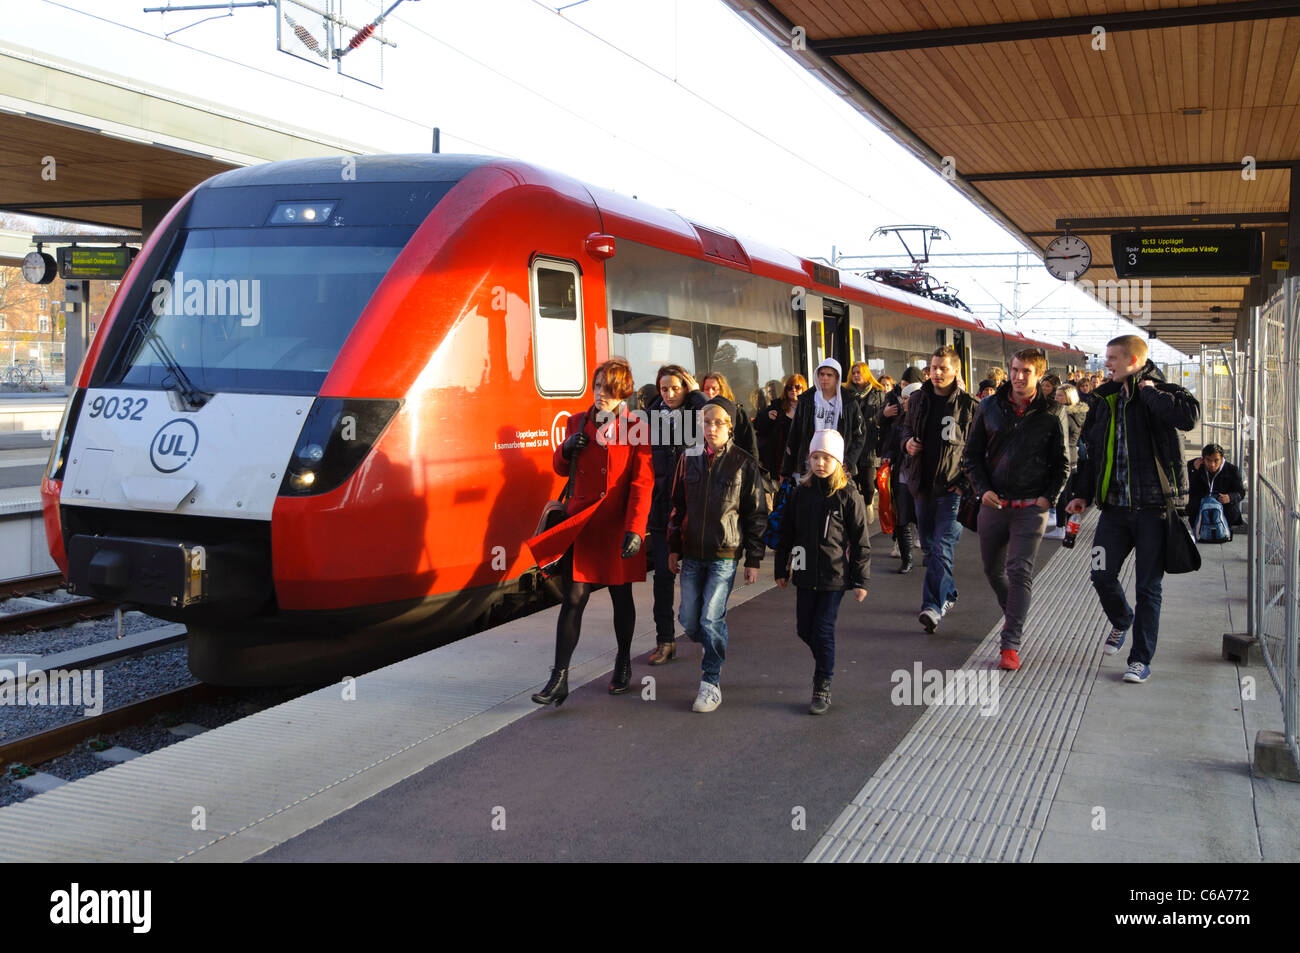 Fast higher-speed commuter train at a station with crowds of passengers on the platform Stock Photo